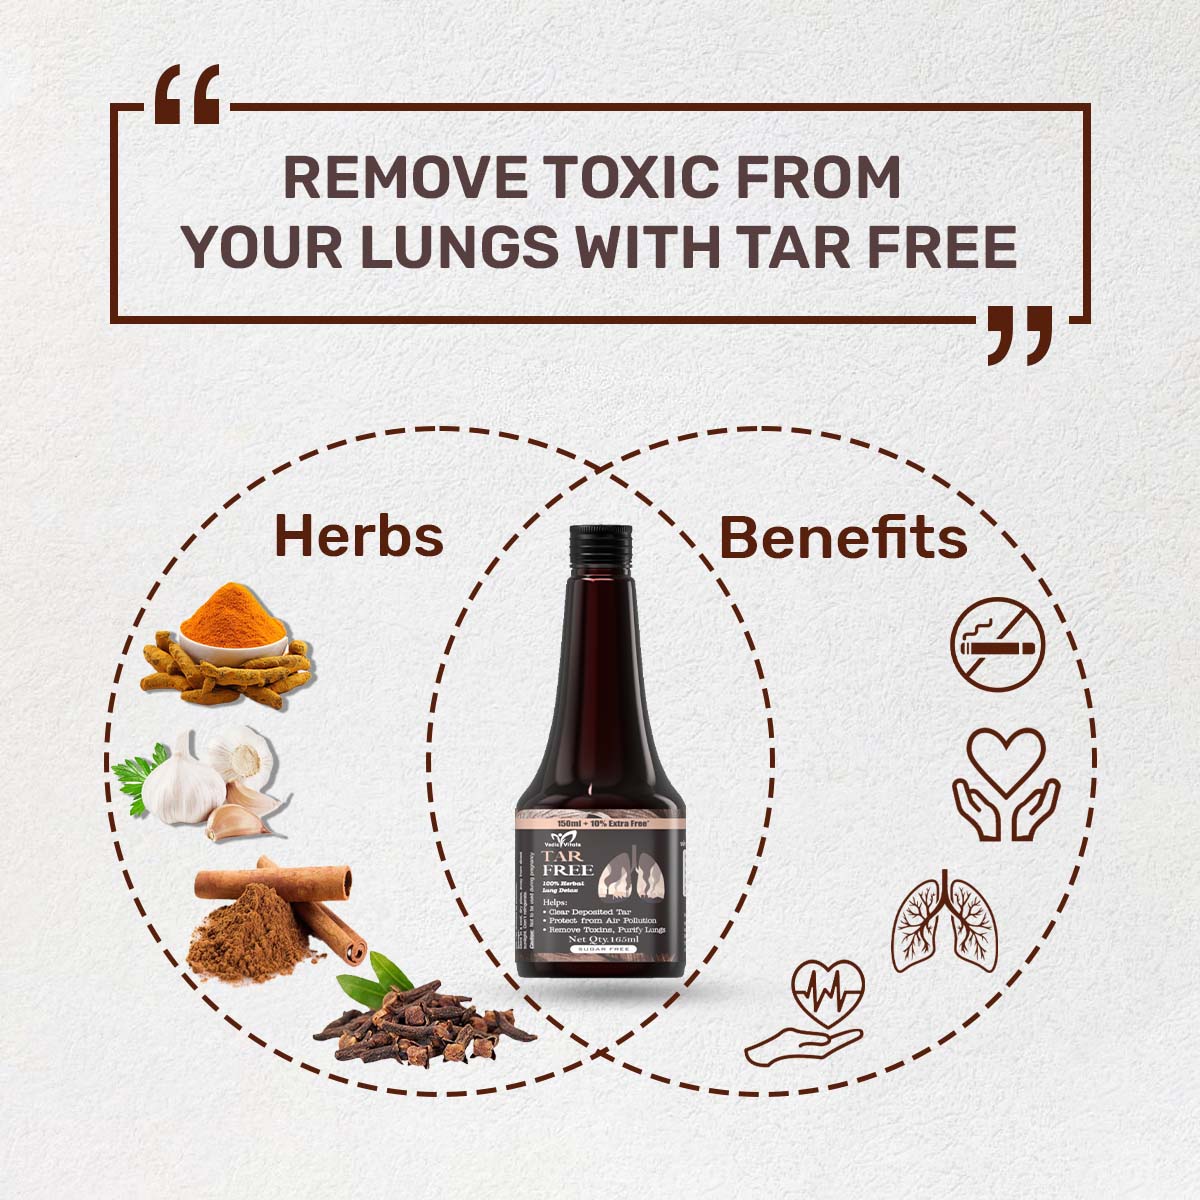 Tar Free - Ultimate Lung Detox Syrup For Healthy Lungs